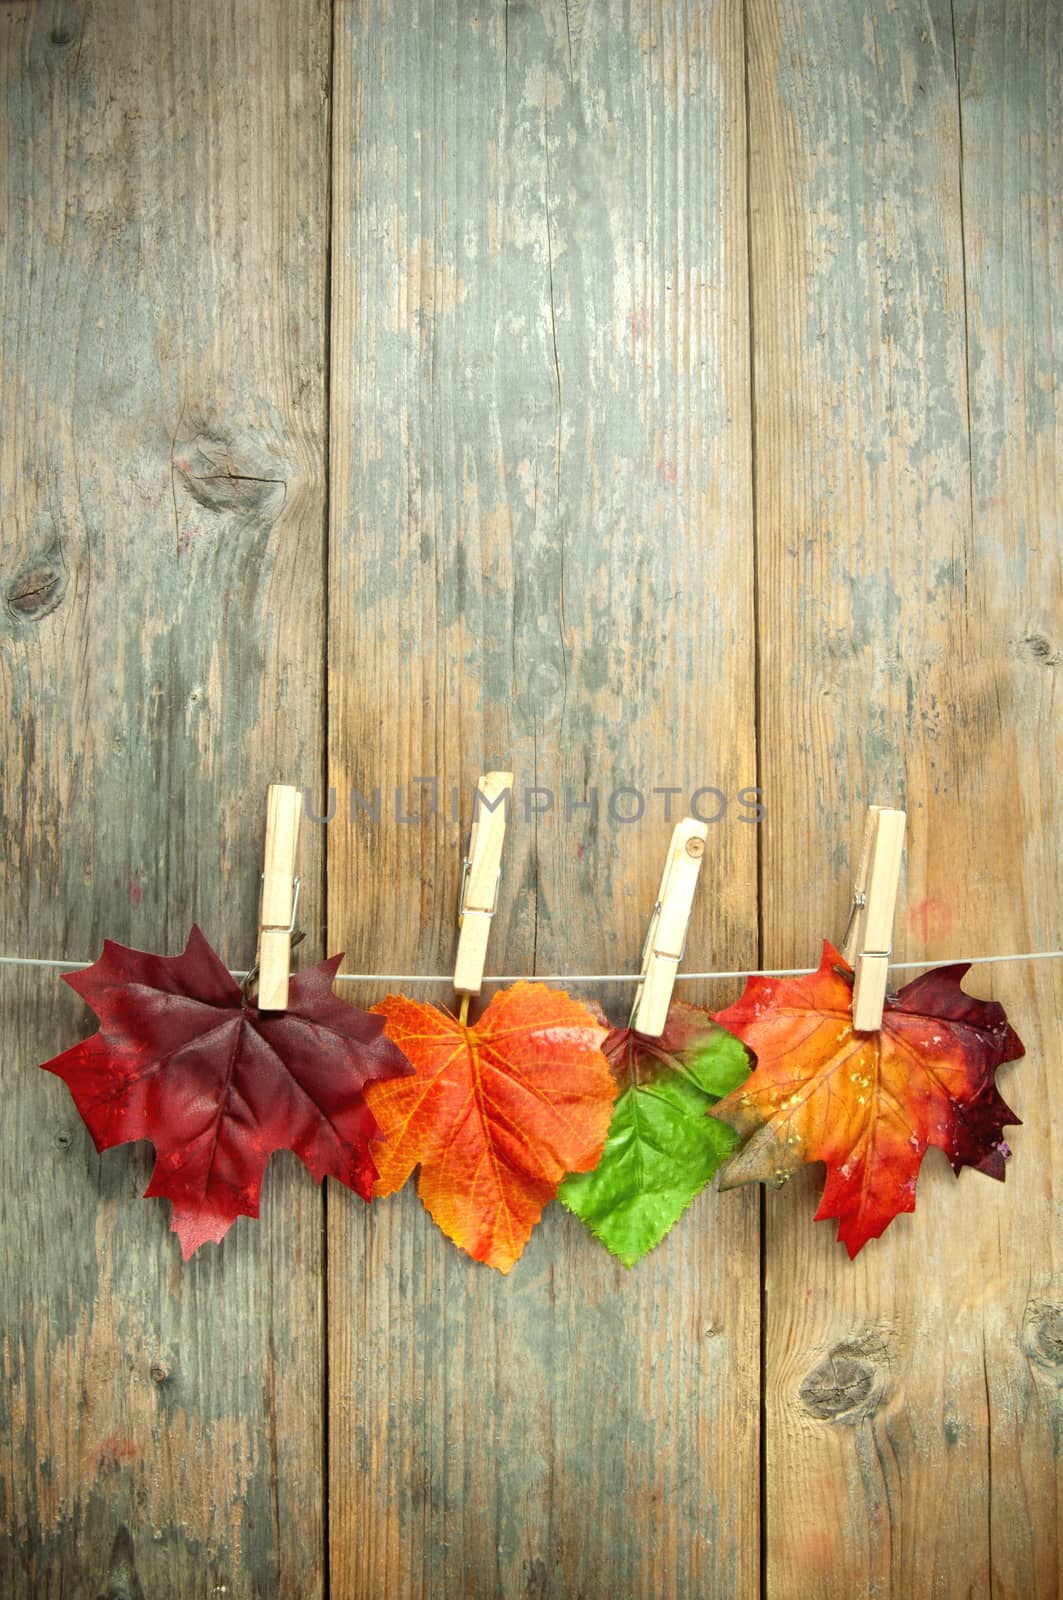 Autumn leaves hanging on a clothes line with pegs against a wooden background